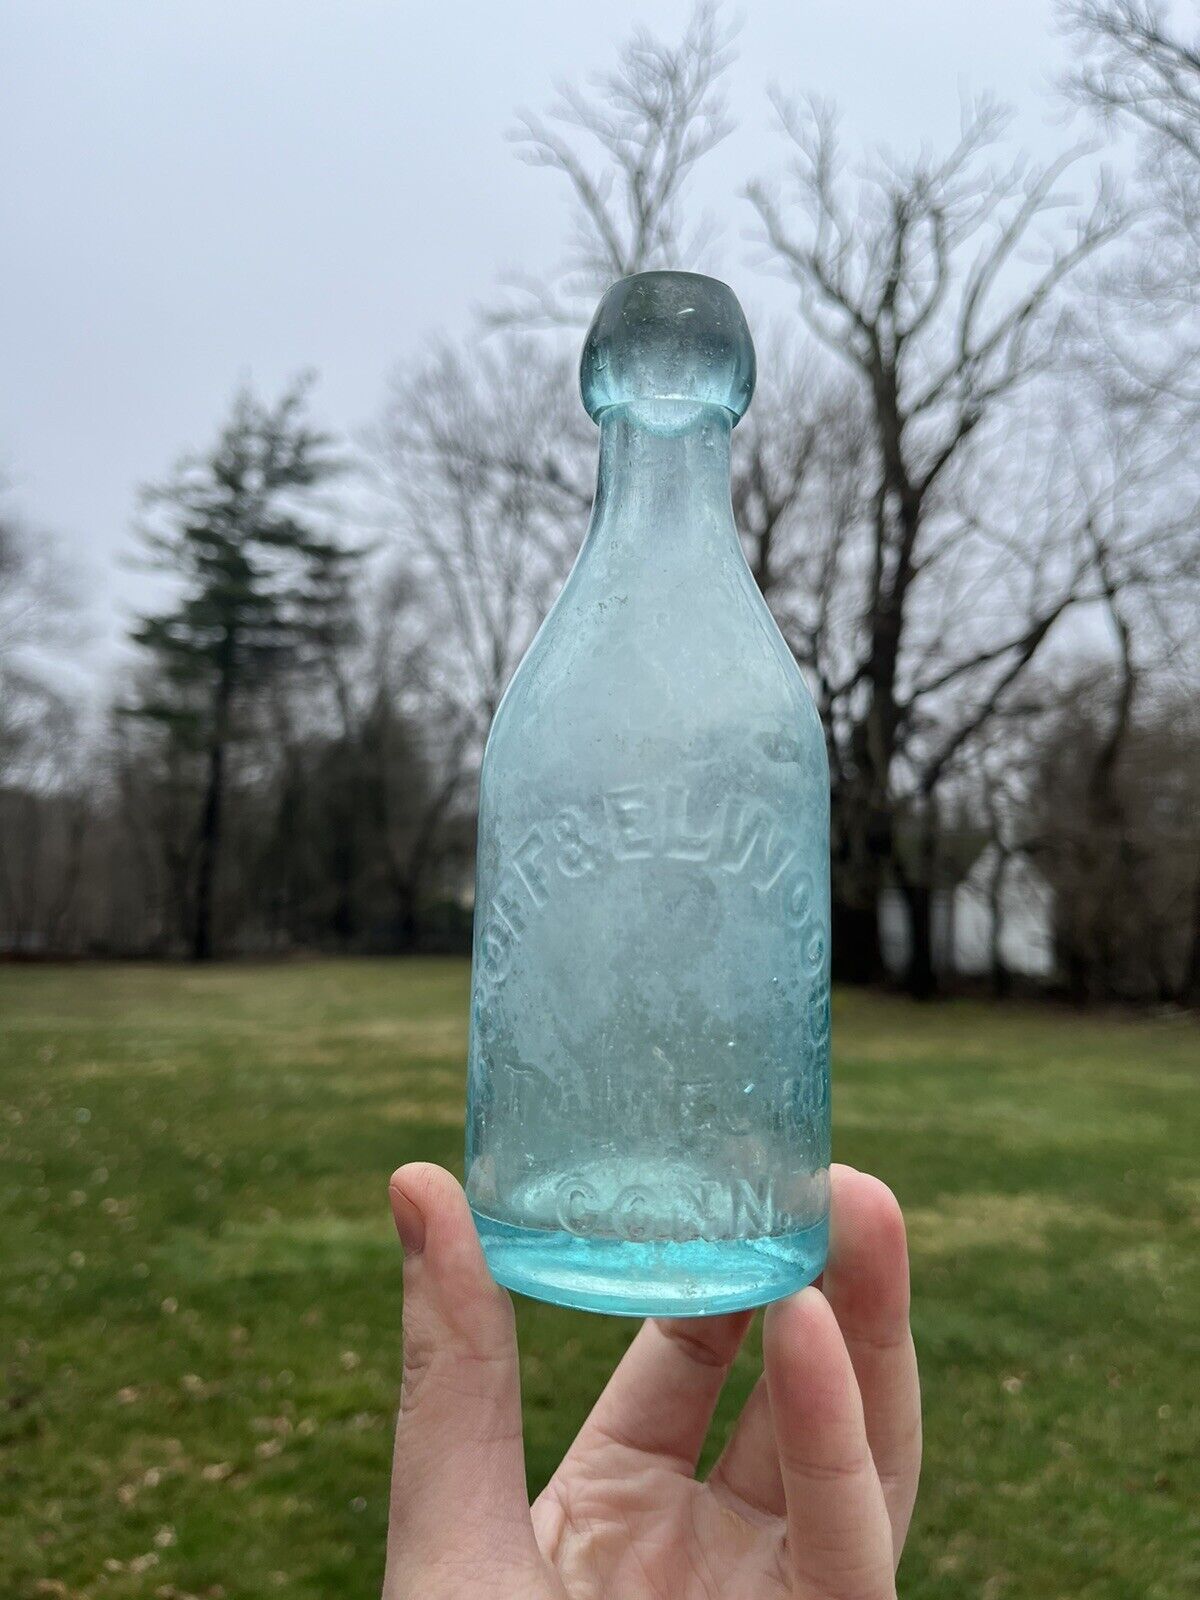 Antique Goff & Elwood Stamford Conn CT EARLY Soda Mineral Water Bottle 1860s-70s